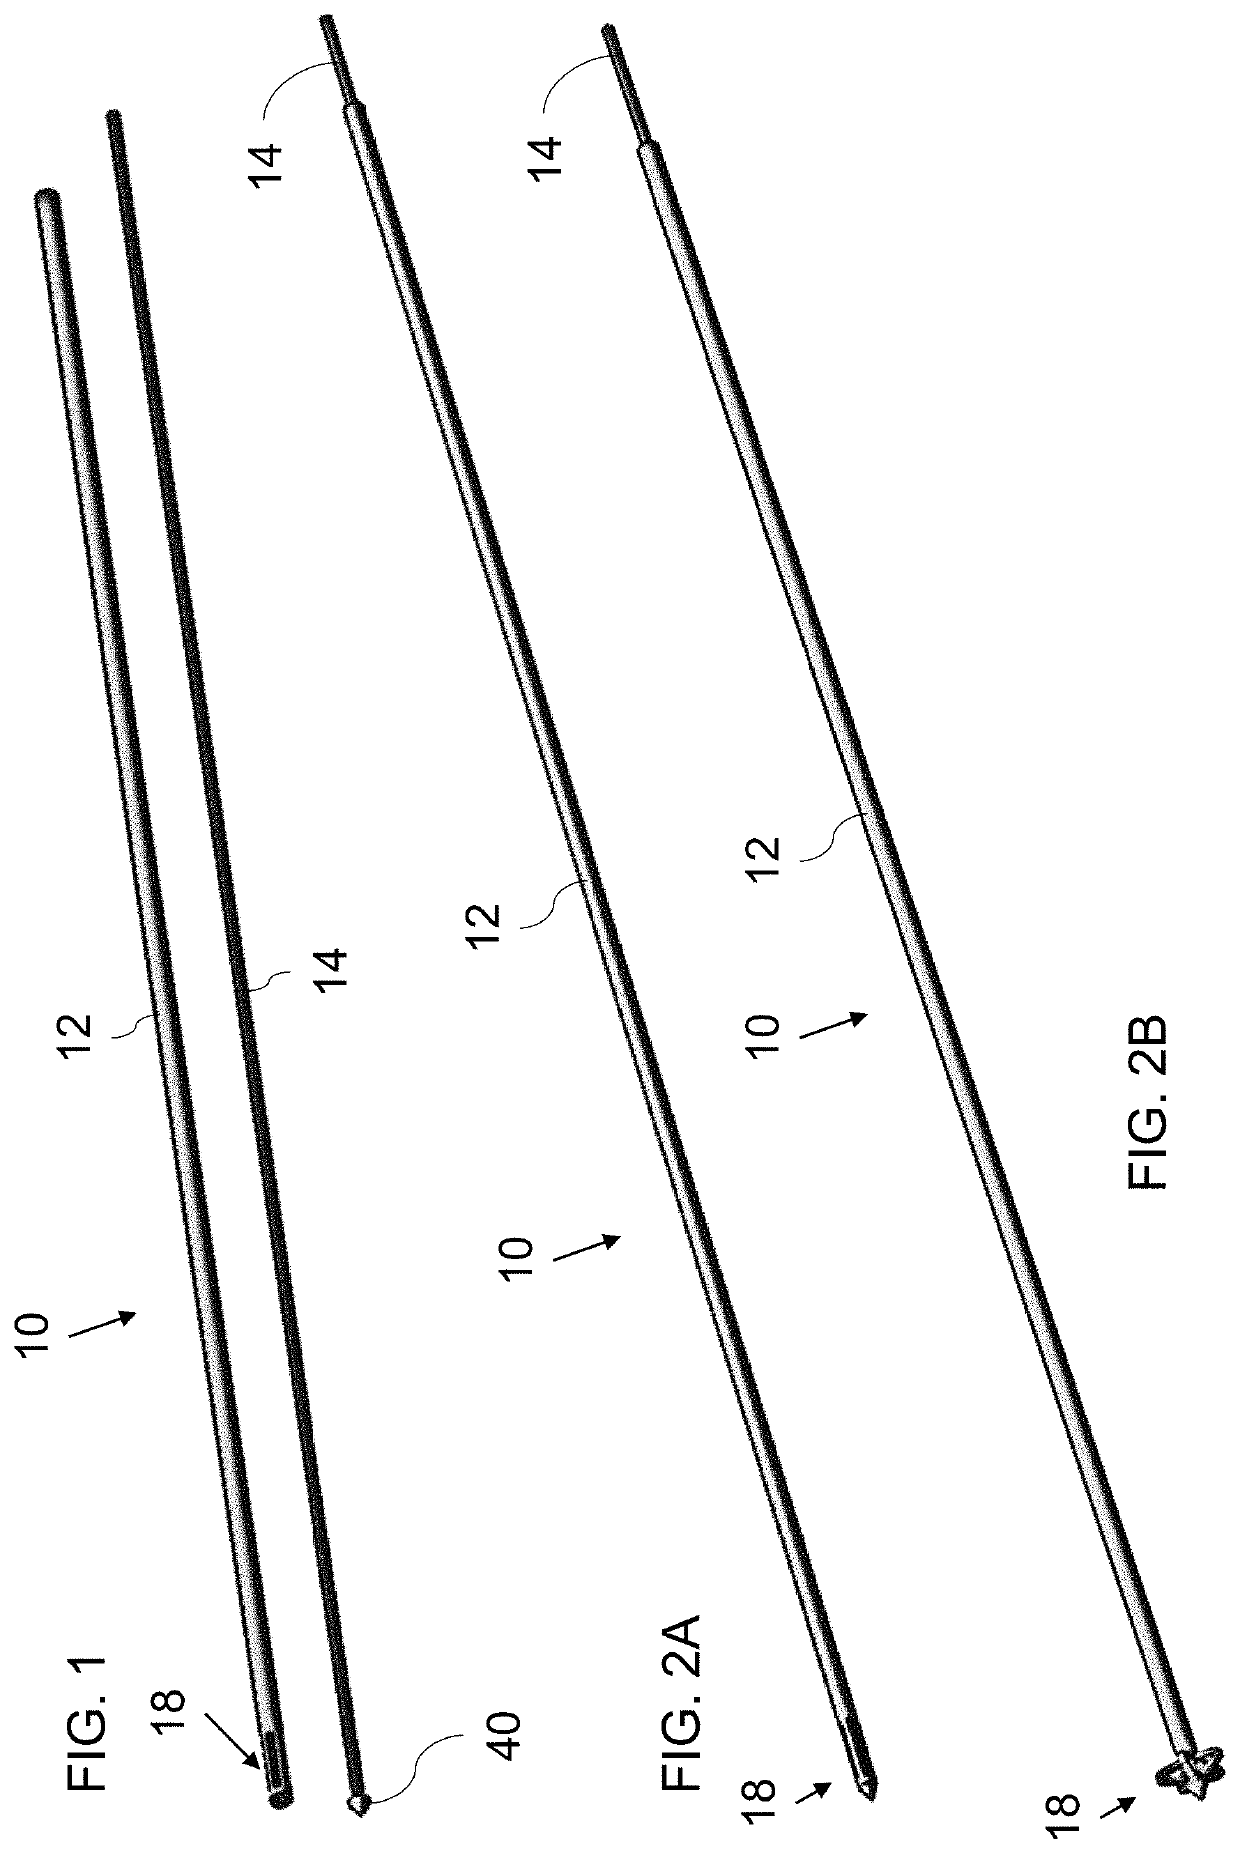 Stiff guide wire with anchoring configuration